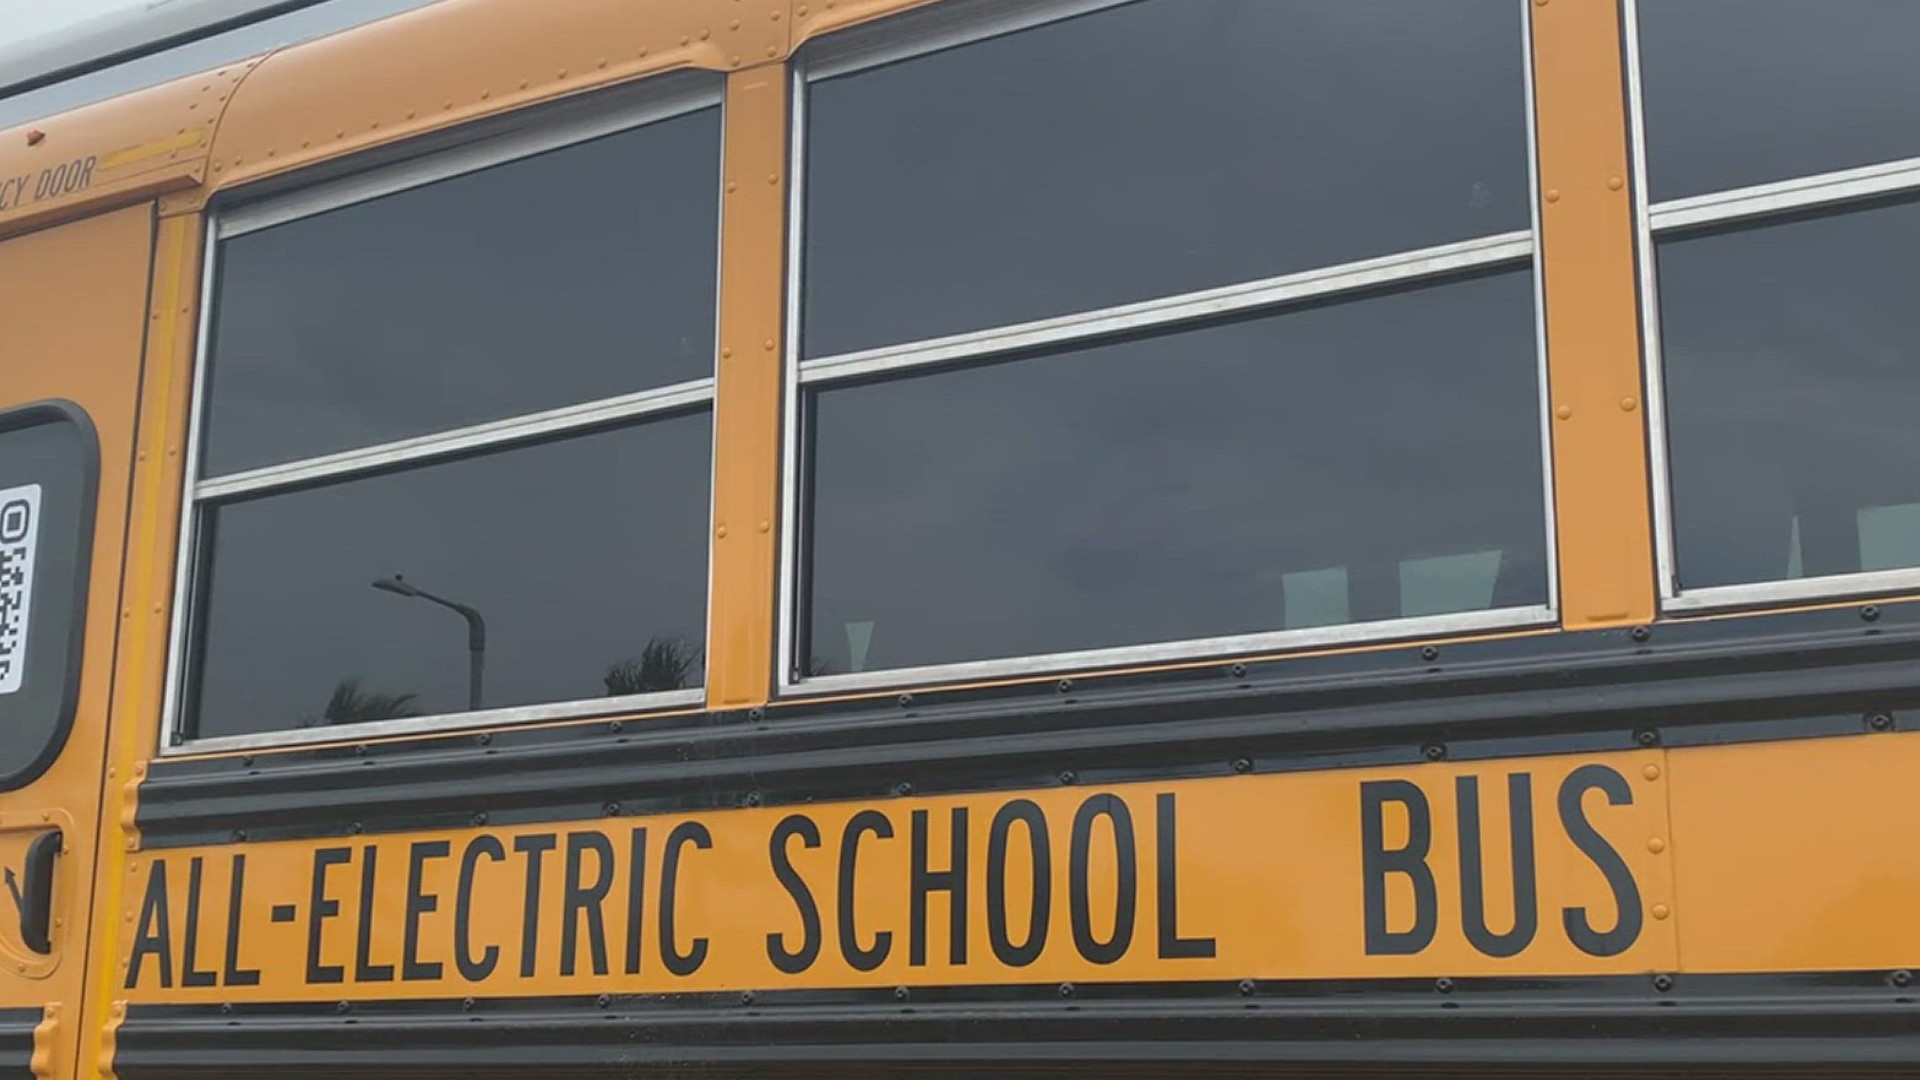 The Texas Electric School Bus Project is working to make all school busses electric.